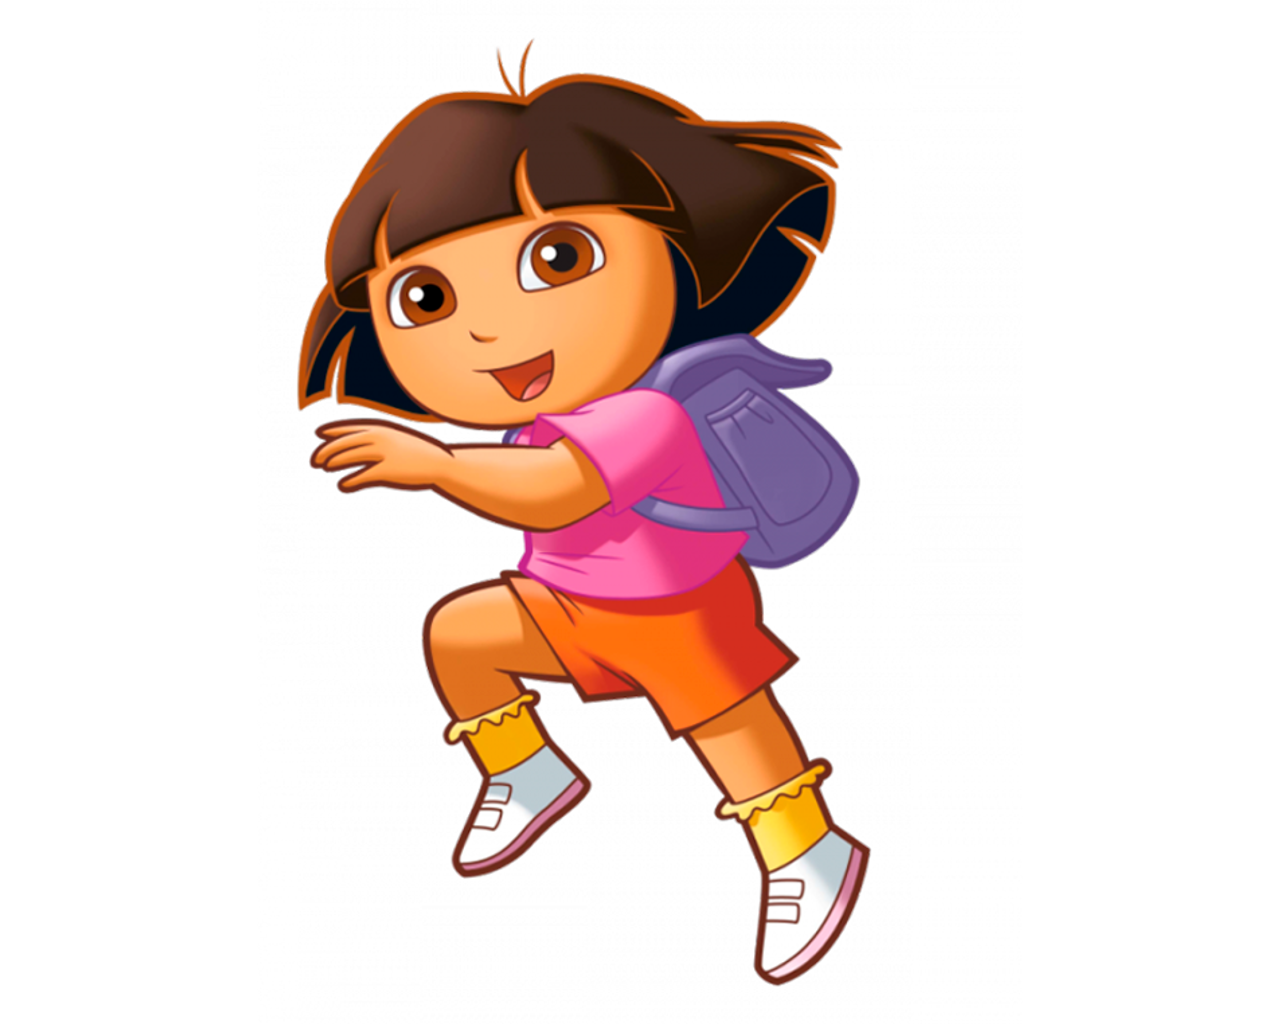 Female Cartoon Character PNG Image | PNG Mart